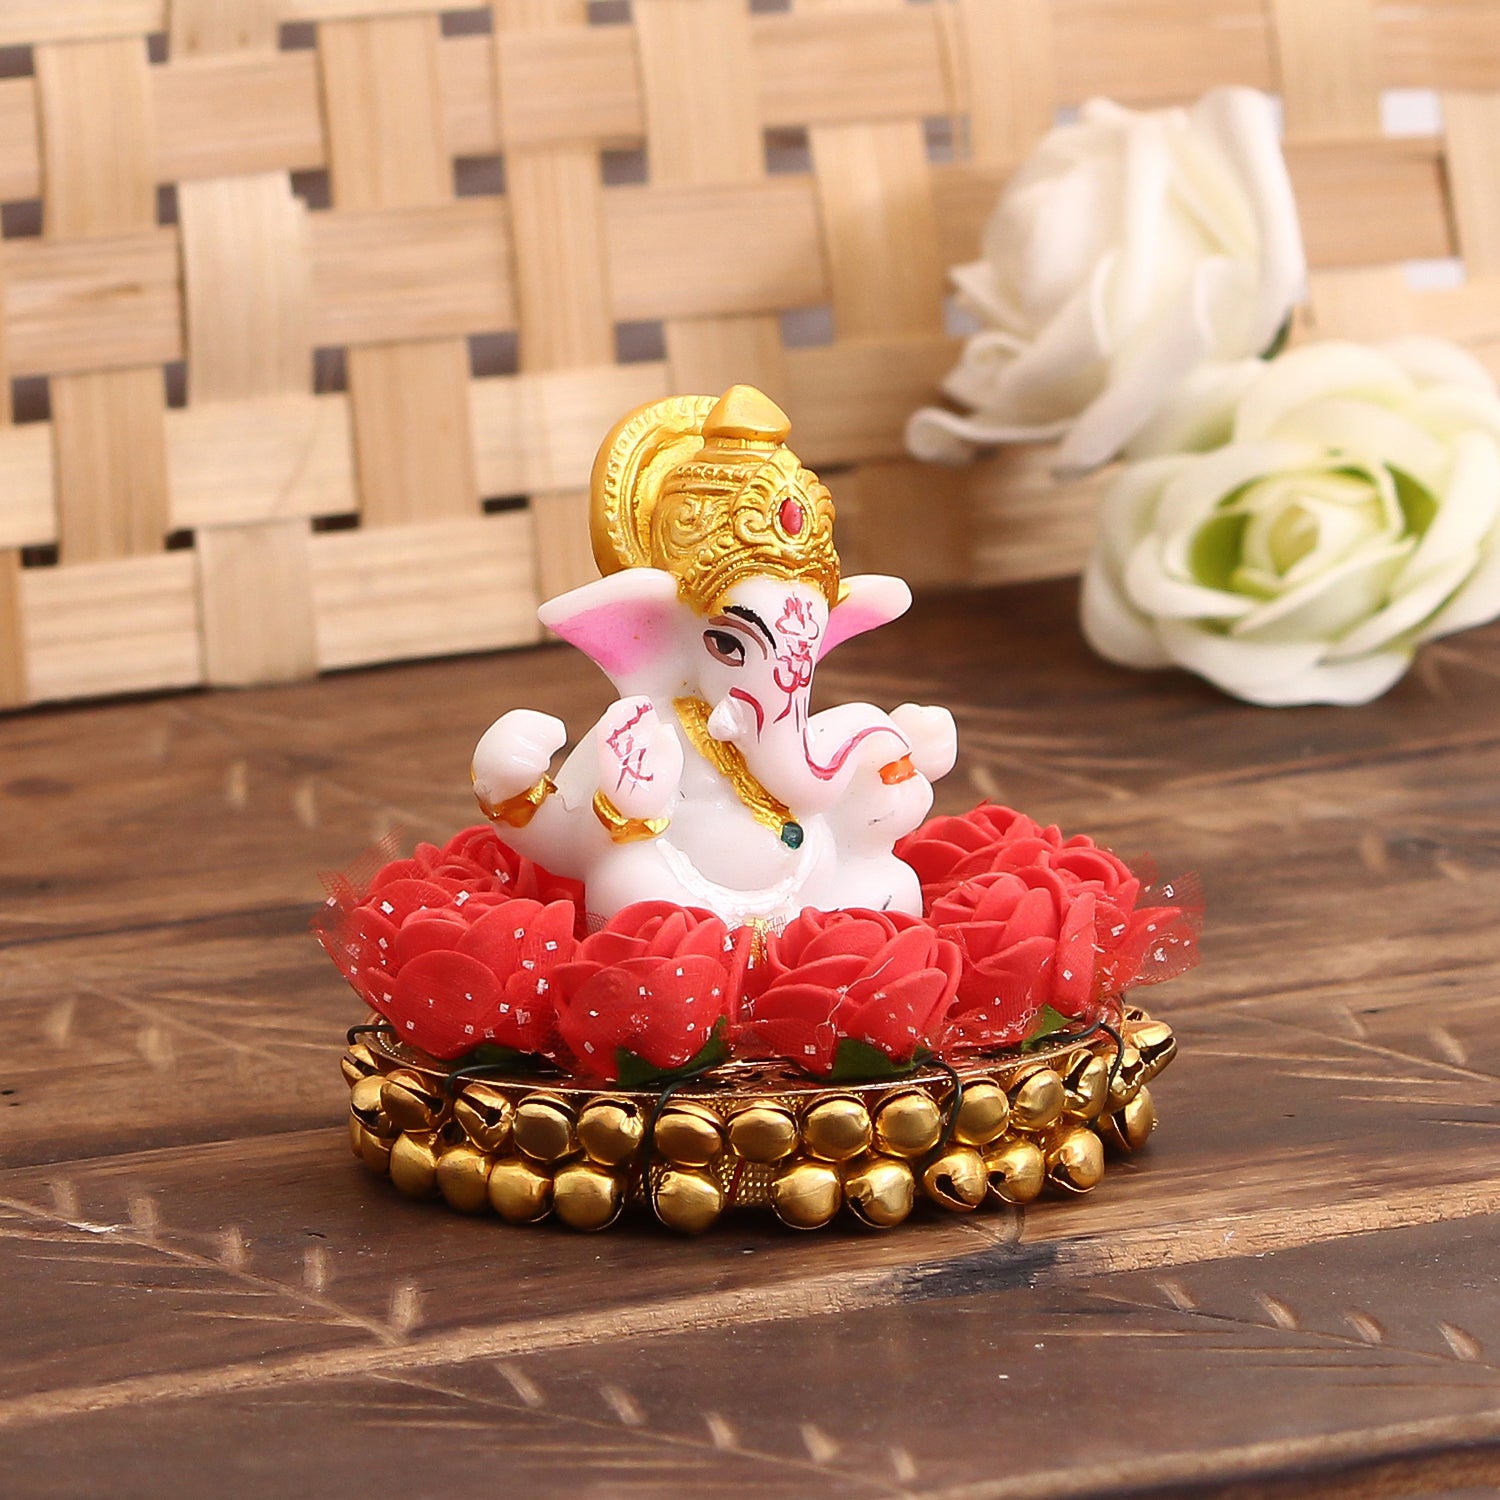 Polyresin Lord Ganesha Idol on Decorative Plate for Car Dashboard and Home